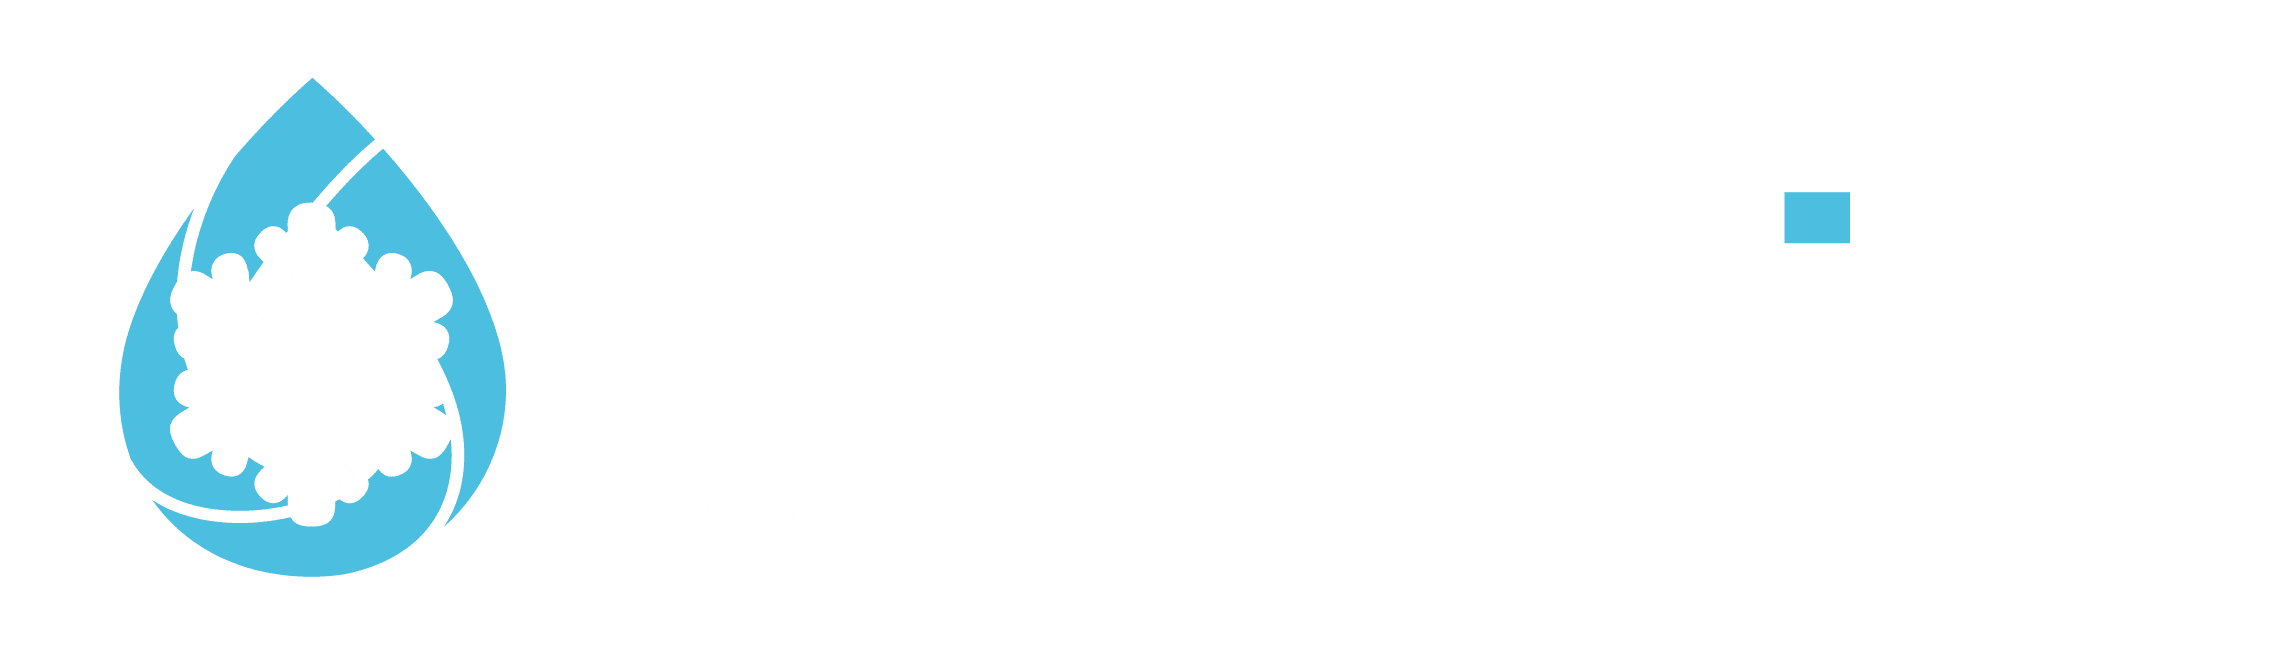 Heat Pump Services |  Elite Heating and Air